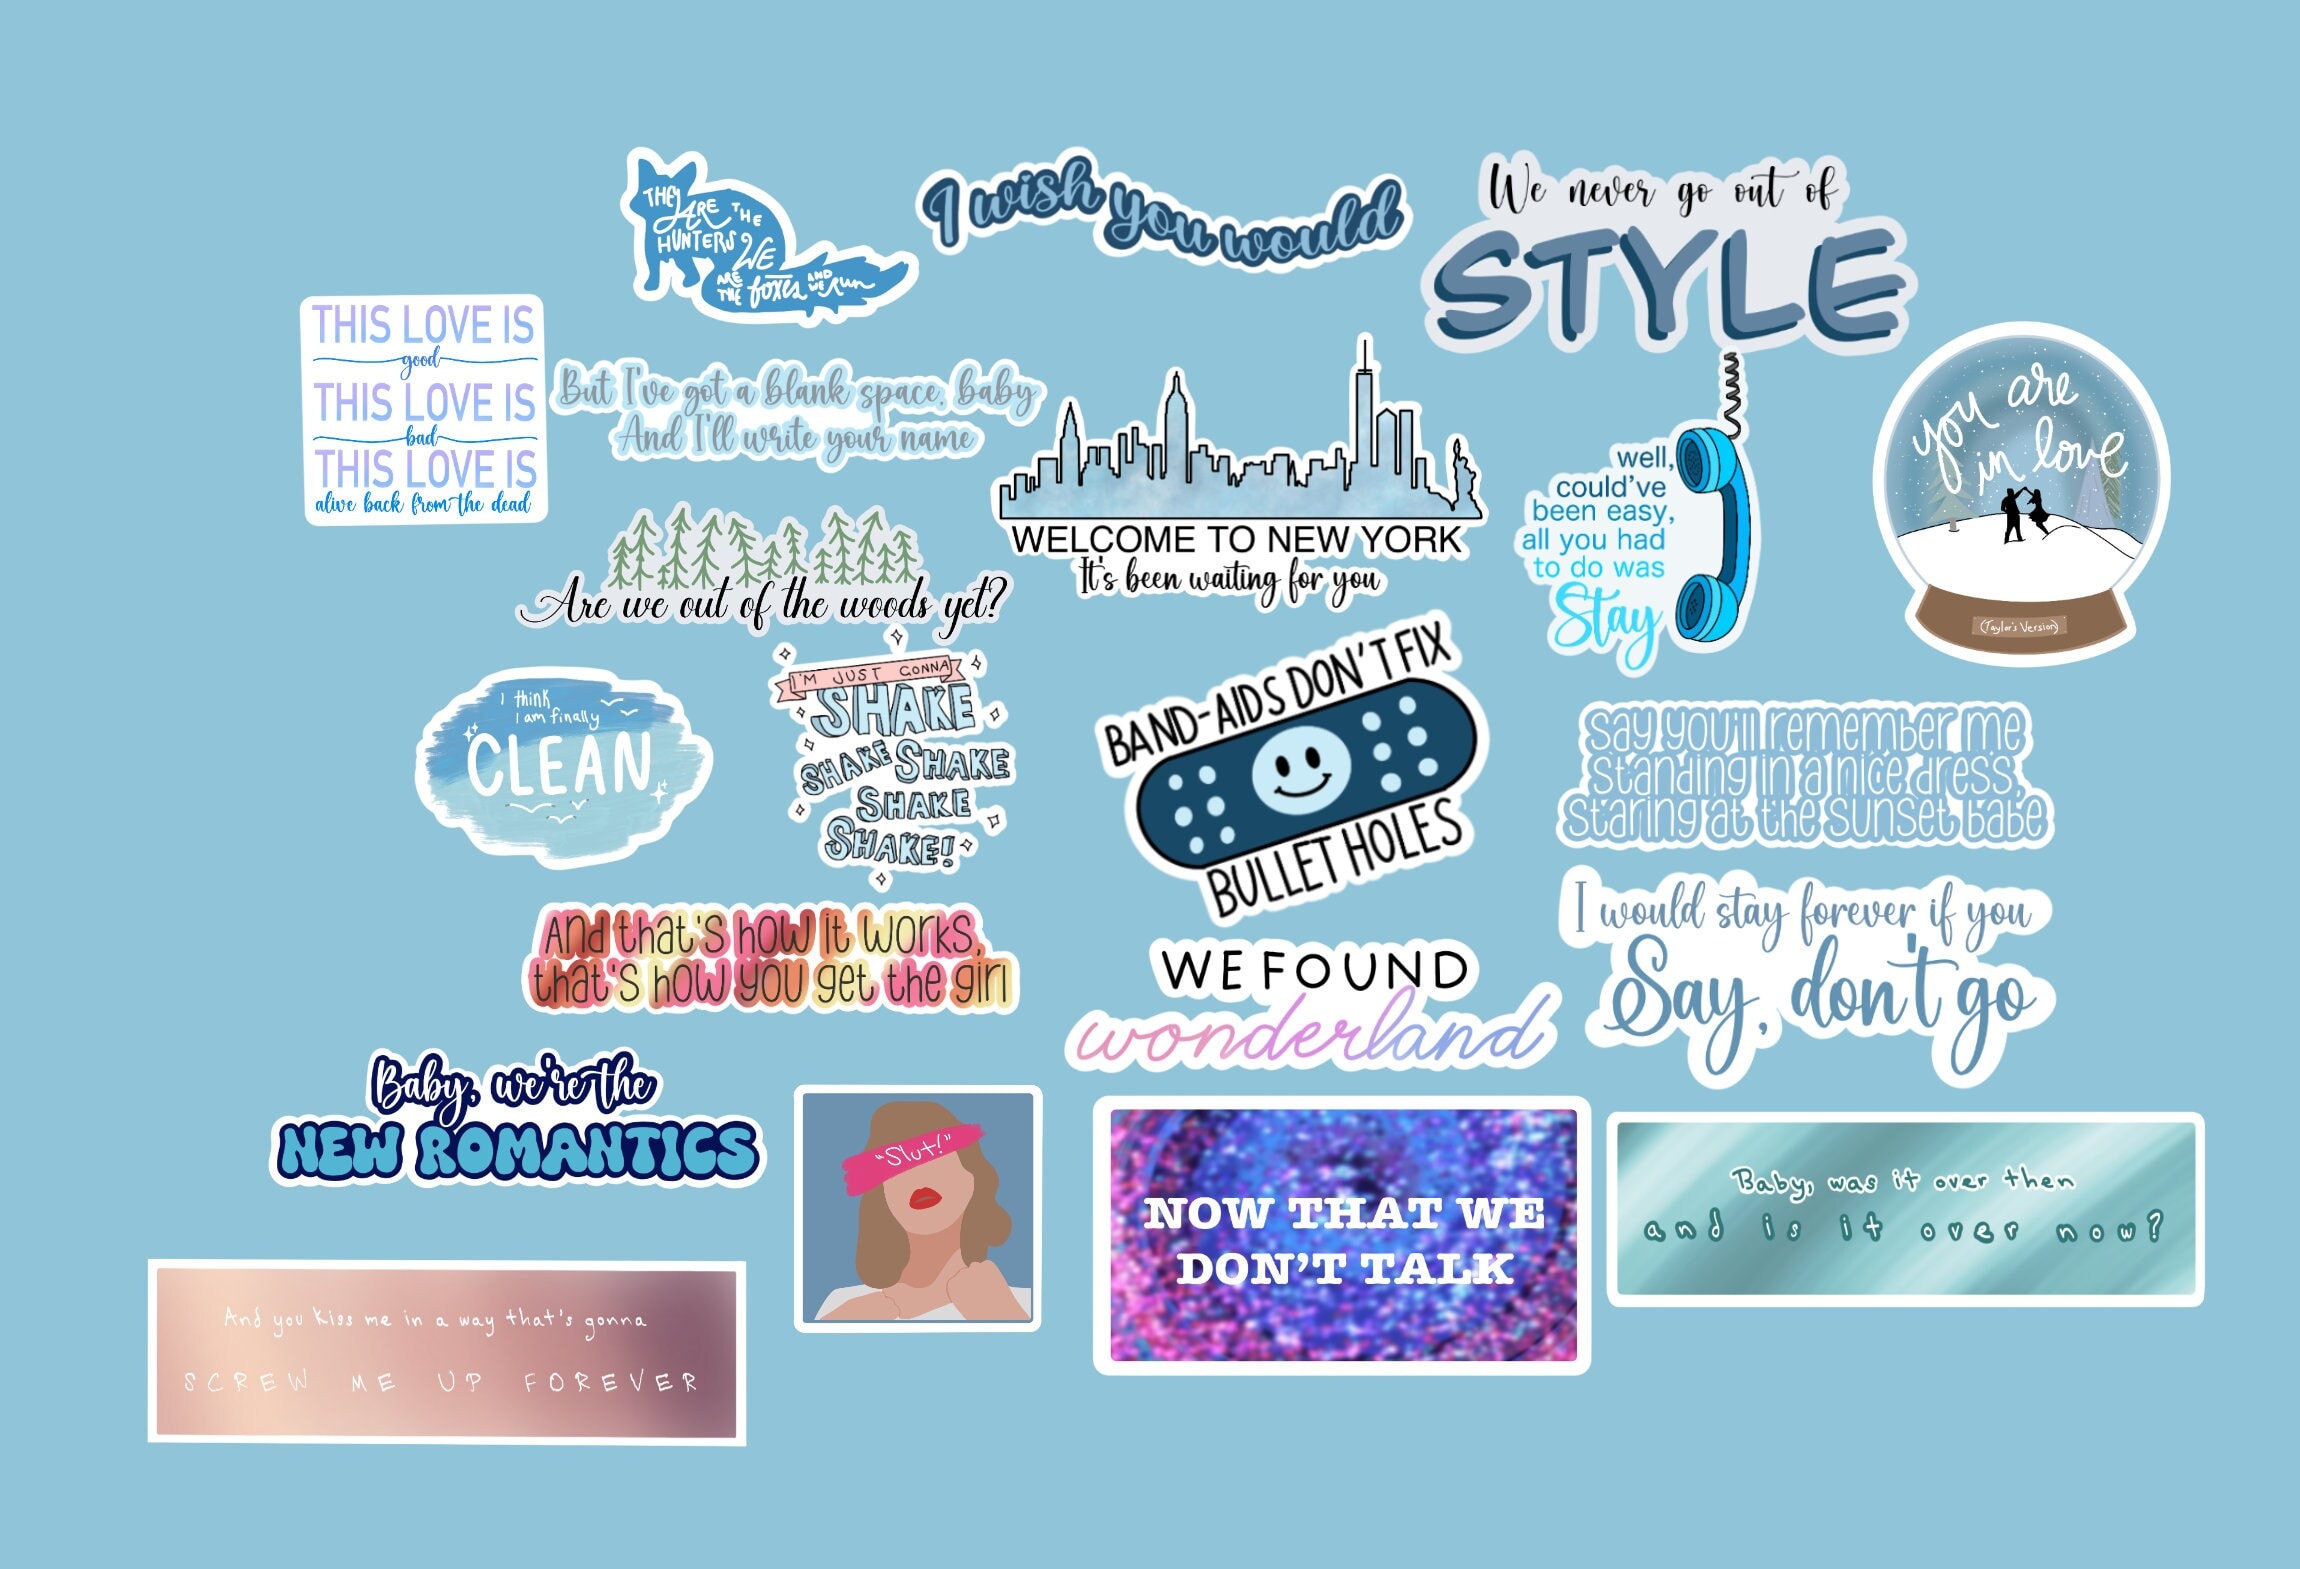 TBKOMH Valentine's Day Gifts,Taylor Swift,Taylor Swift 1989,Taylor Swift  Stickers,100 Pack Stickers, Waterproof Stickers, Scrapbook Stickers, Cute  Trendy Music Stickers 